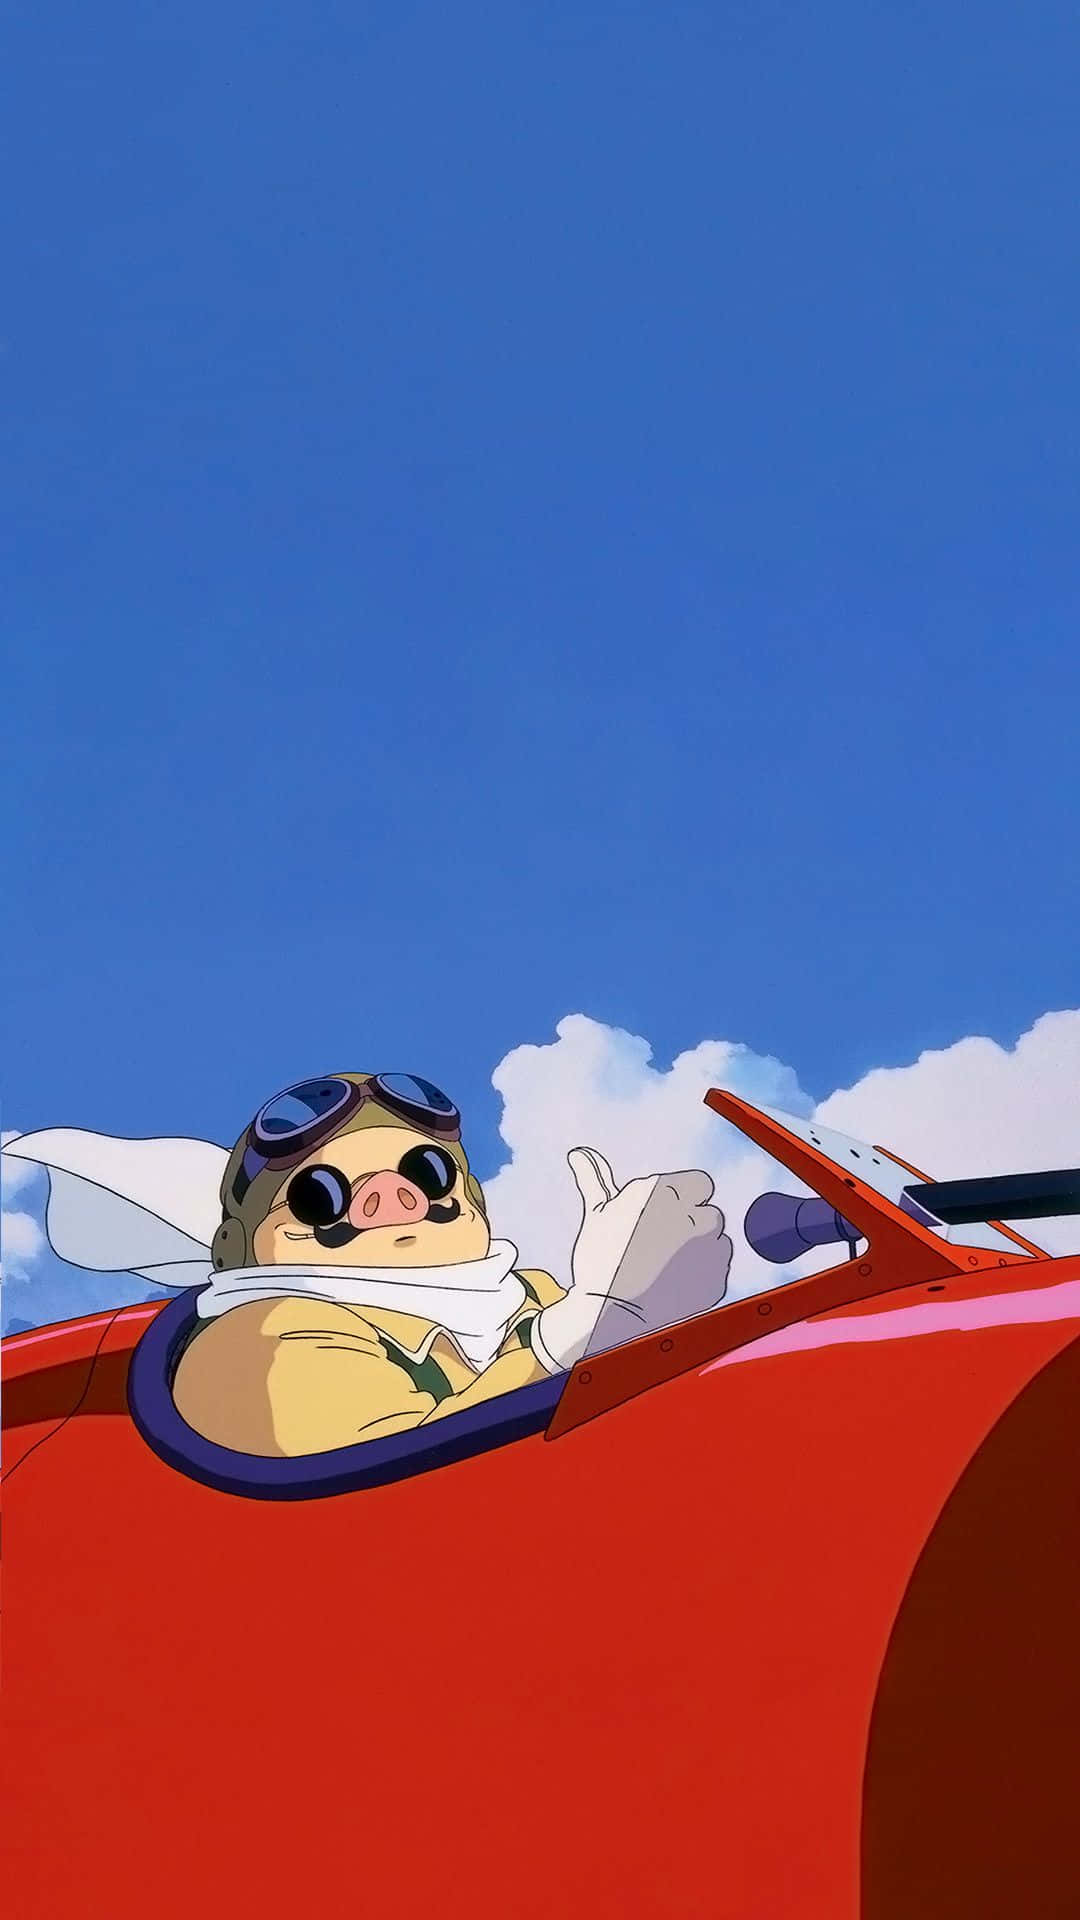 Flying high with Porco Rosso, the crimson pilot Wallpaper